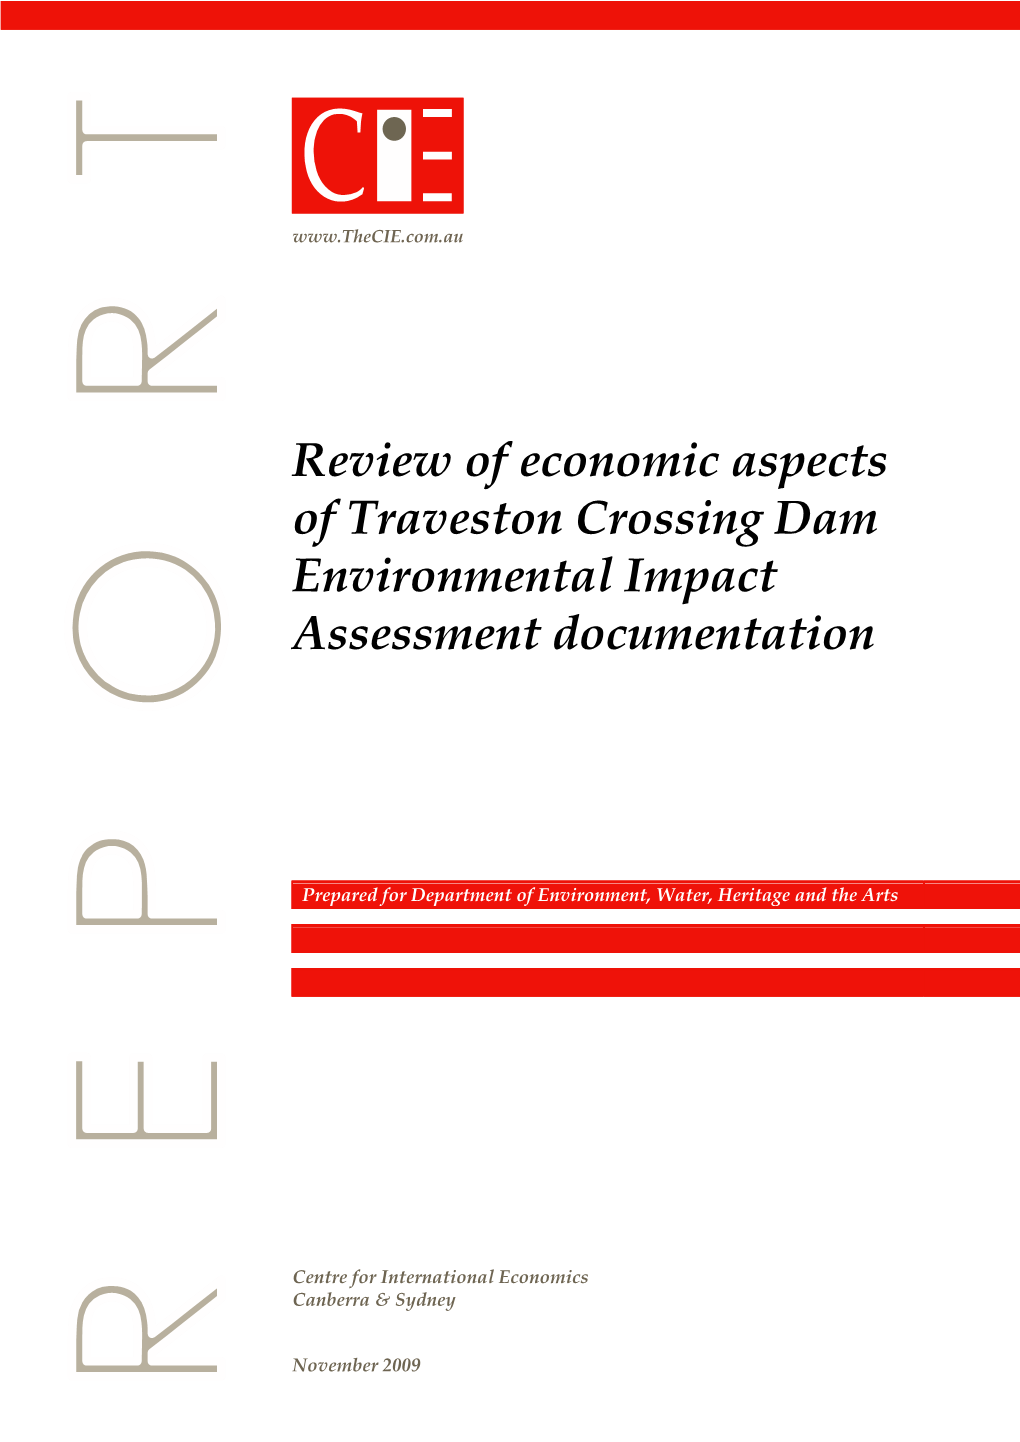 Review of Economic Aspects of Traveston Crossing Dam Environmental Impact Assessment Documentation